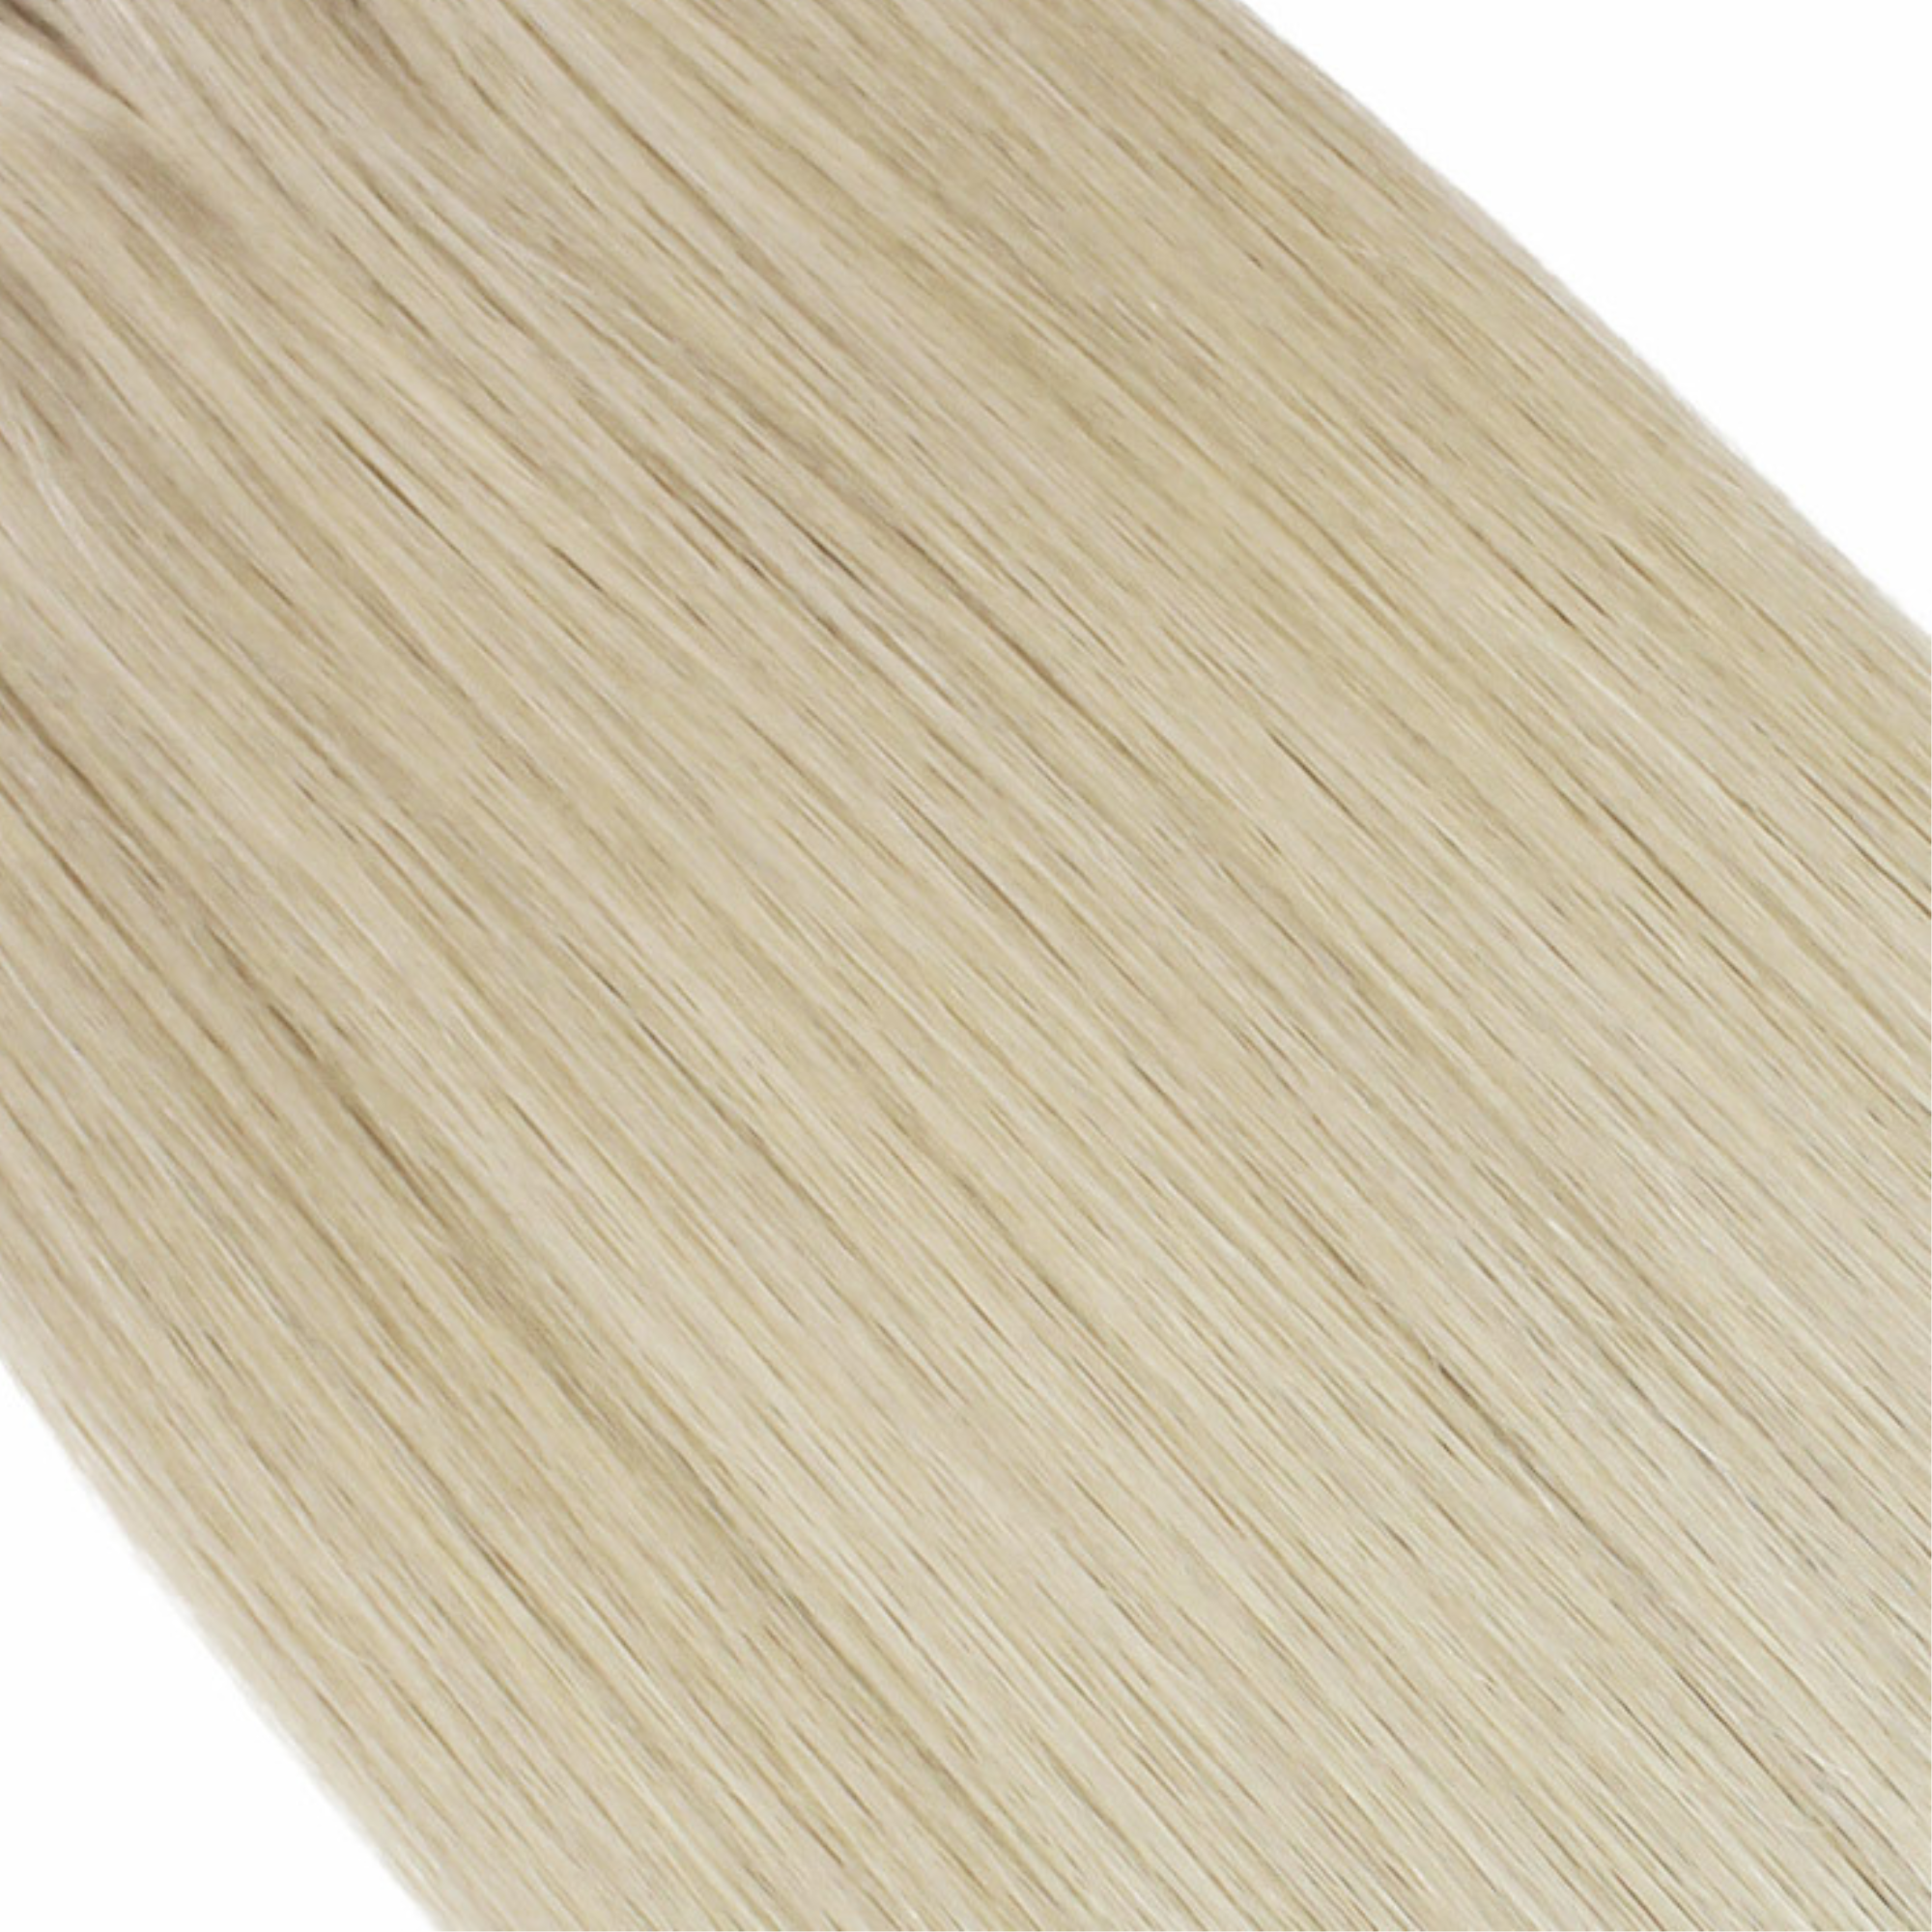 "hair rehab london 24" length 280 grams weight ultimate clip-in hair extensions shade titled ice blonde"